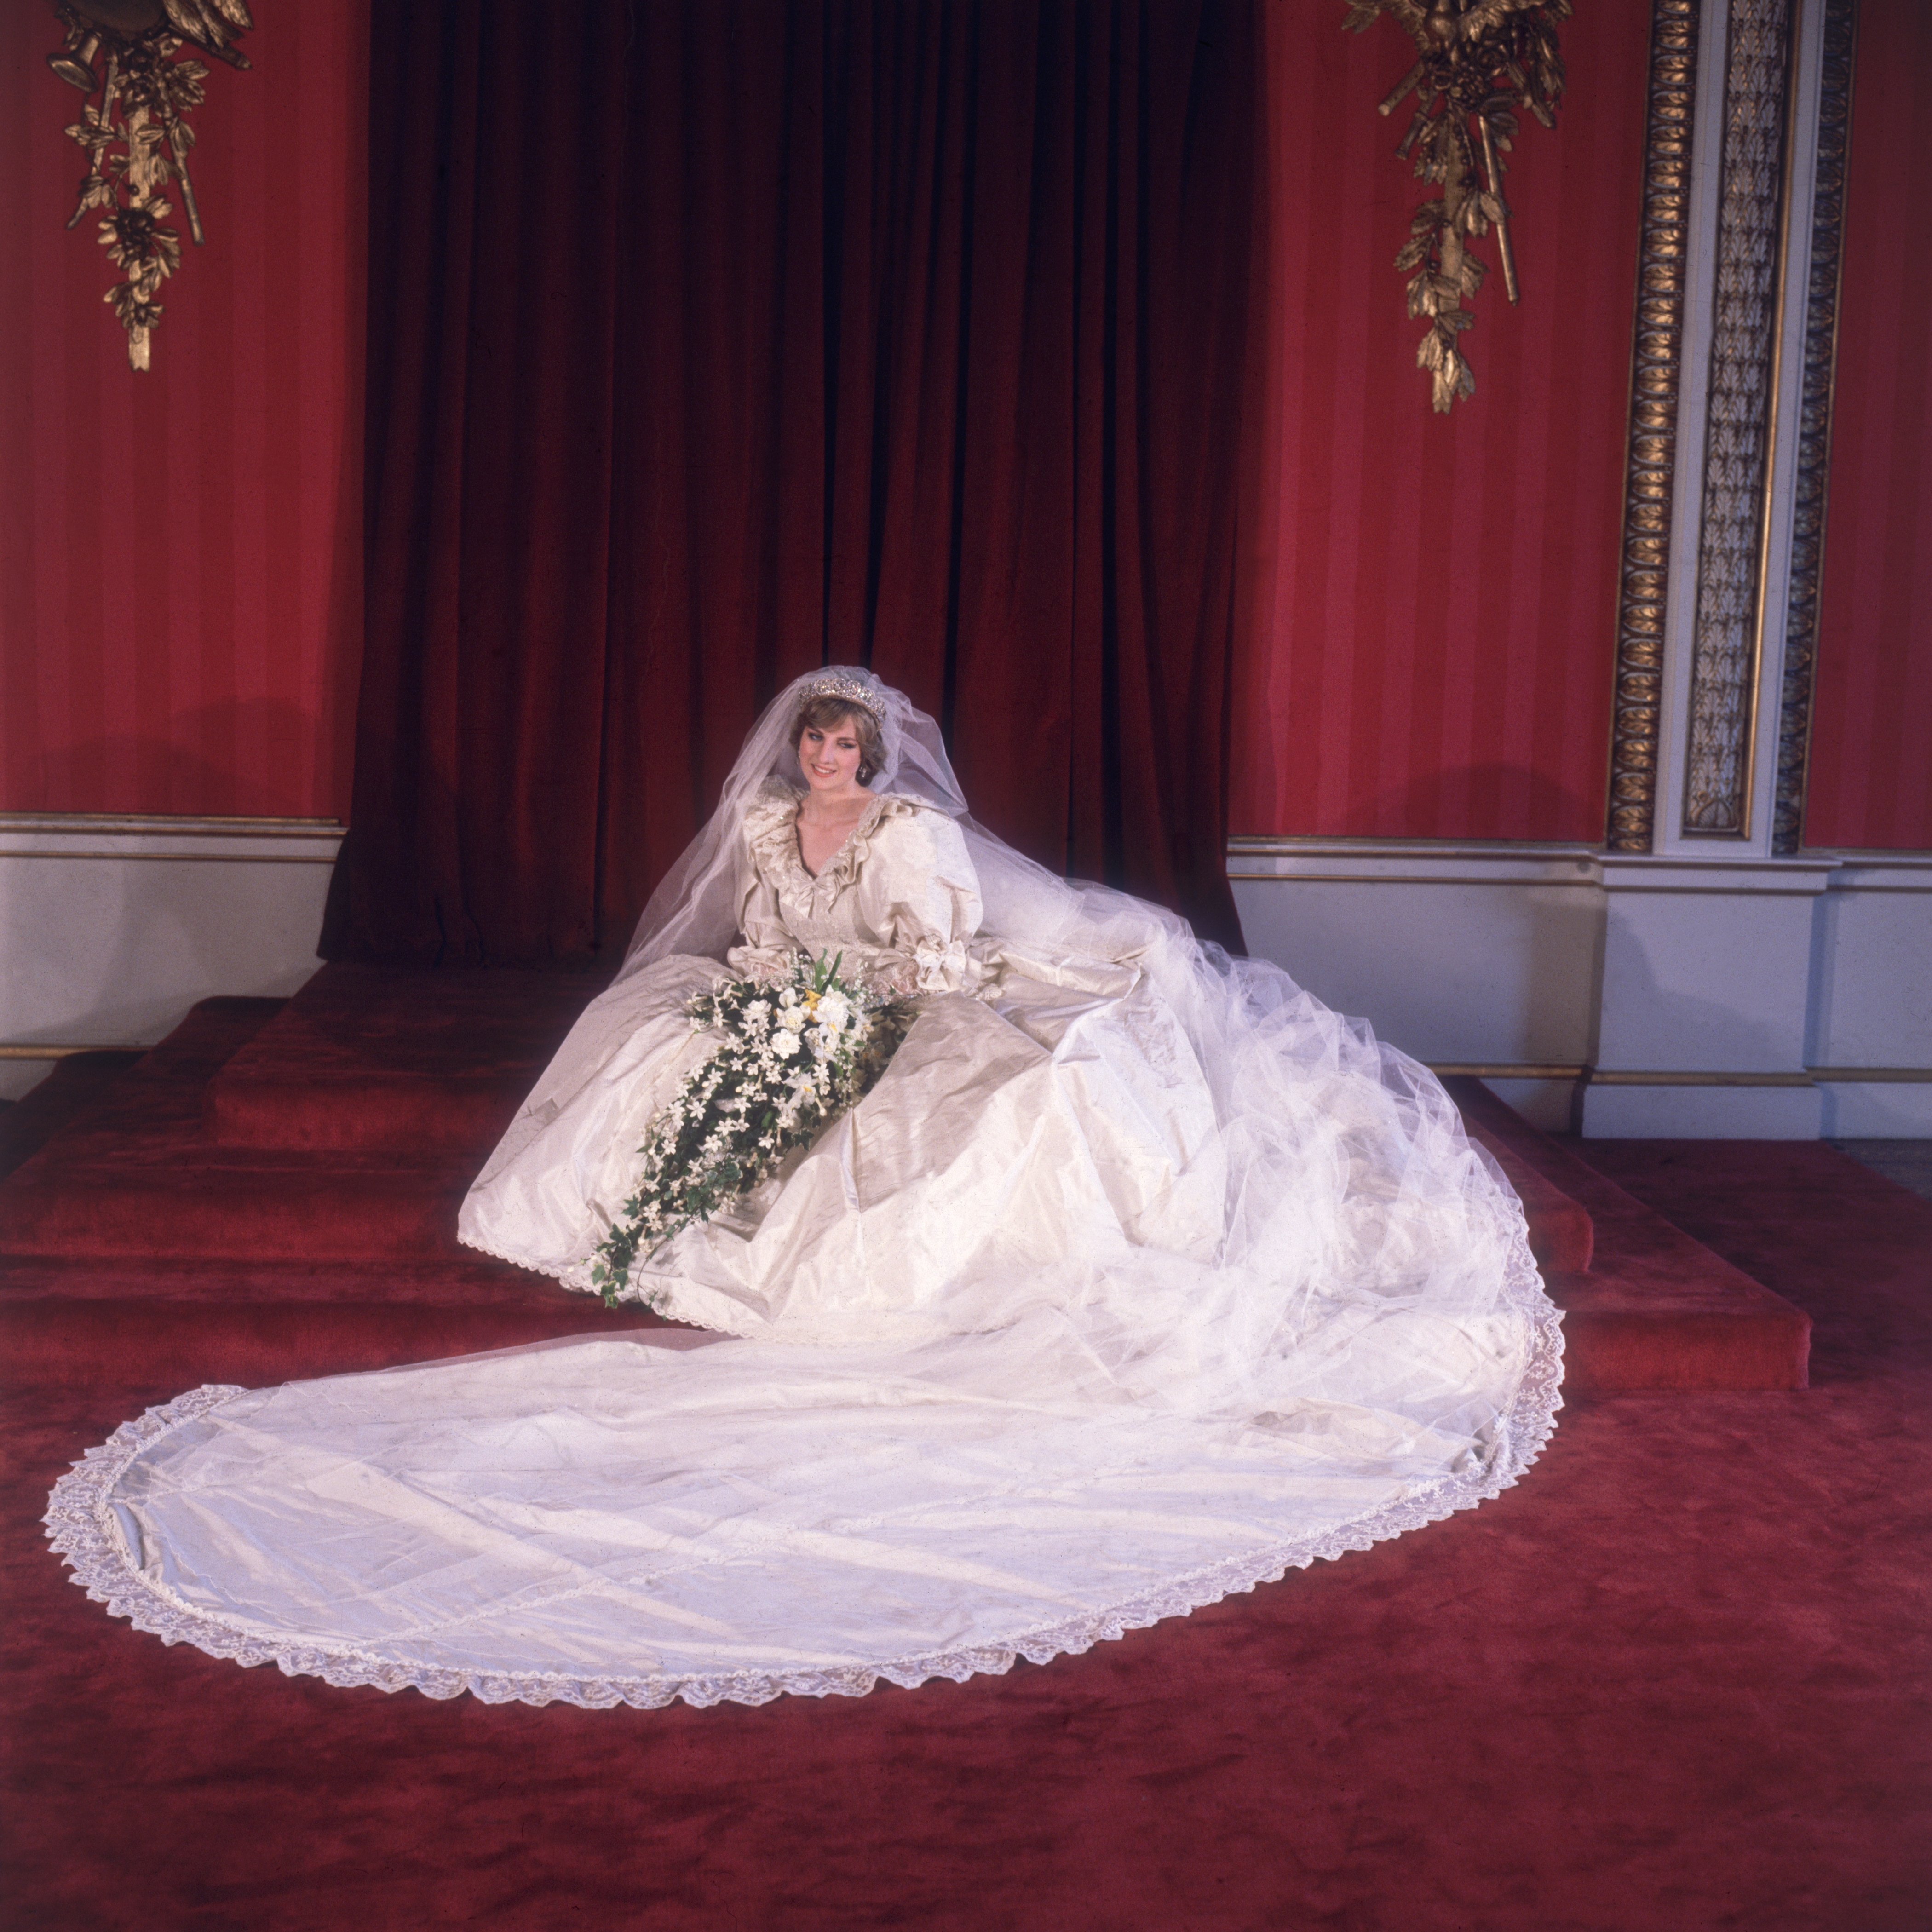 Princess Diana posing for a picture on her wedding day in London, England on July 29, 1981 | Source: Getty Images